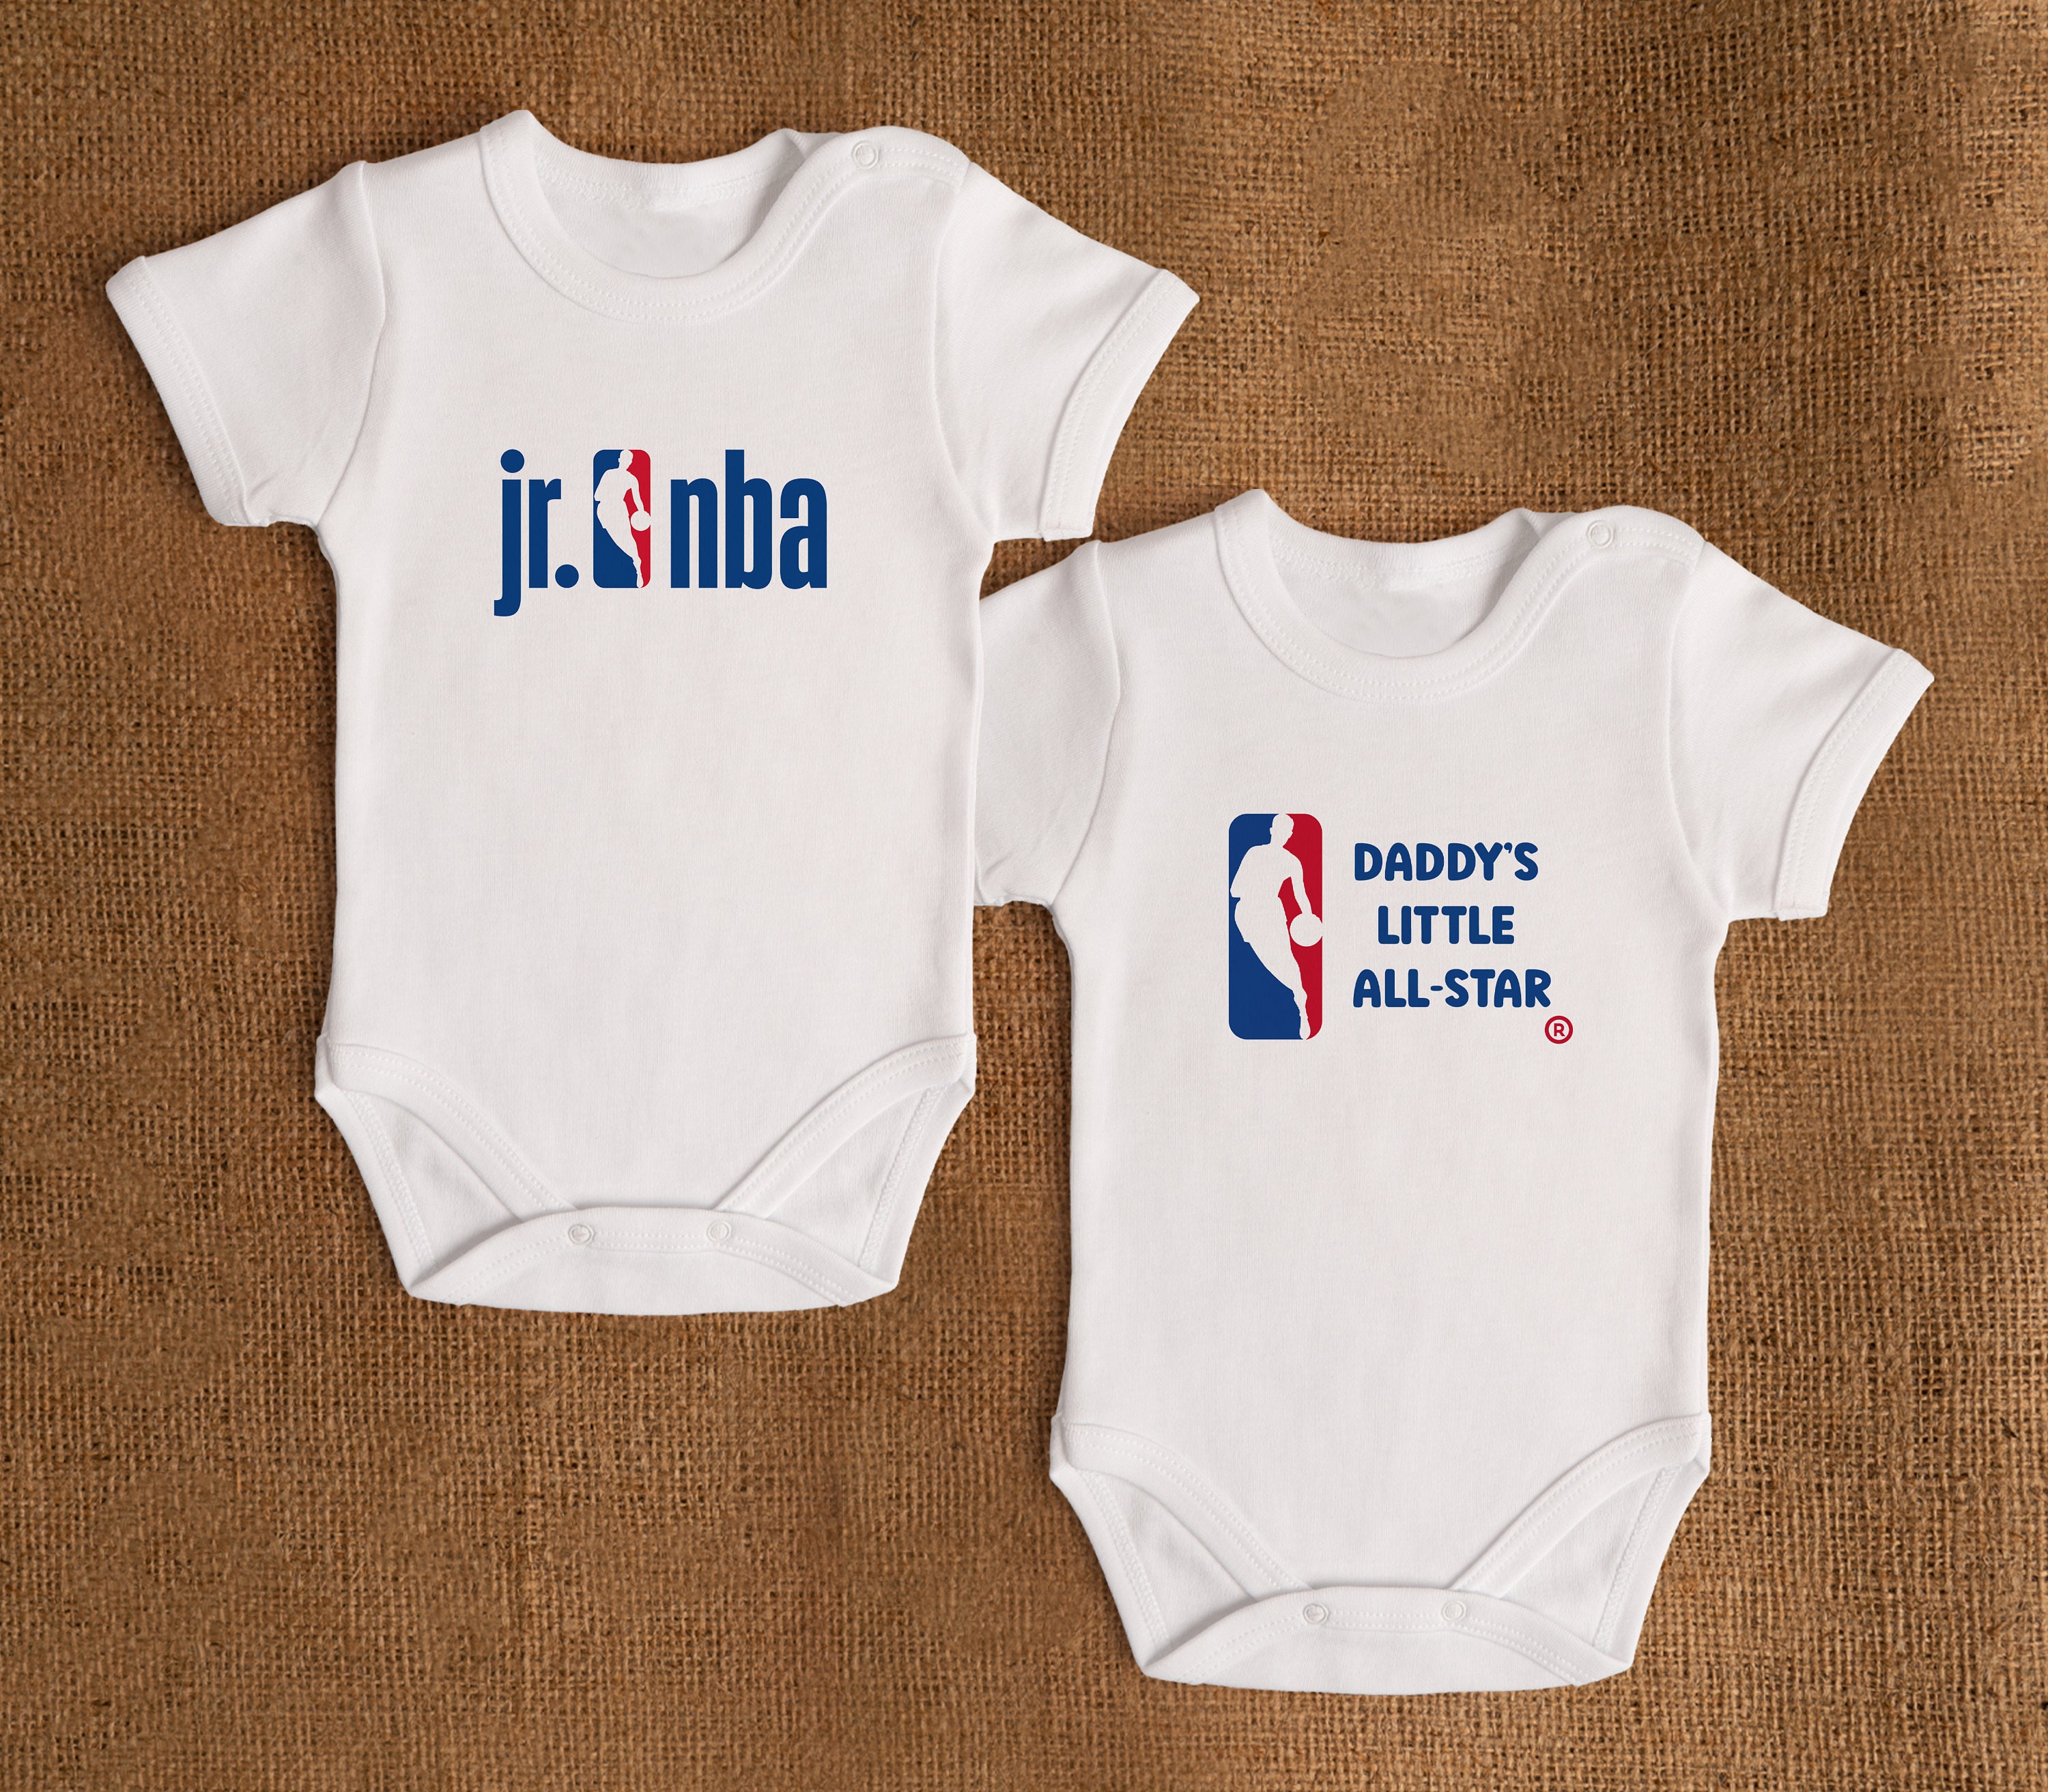 Los Angeles Clippers Greatest Lil Player Babywear Set - Hat, Pant